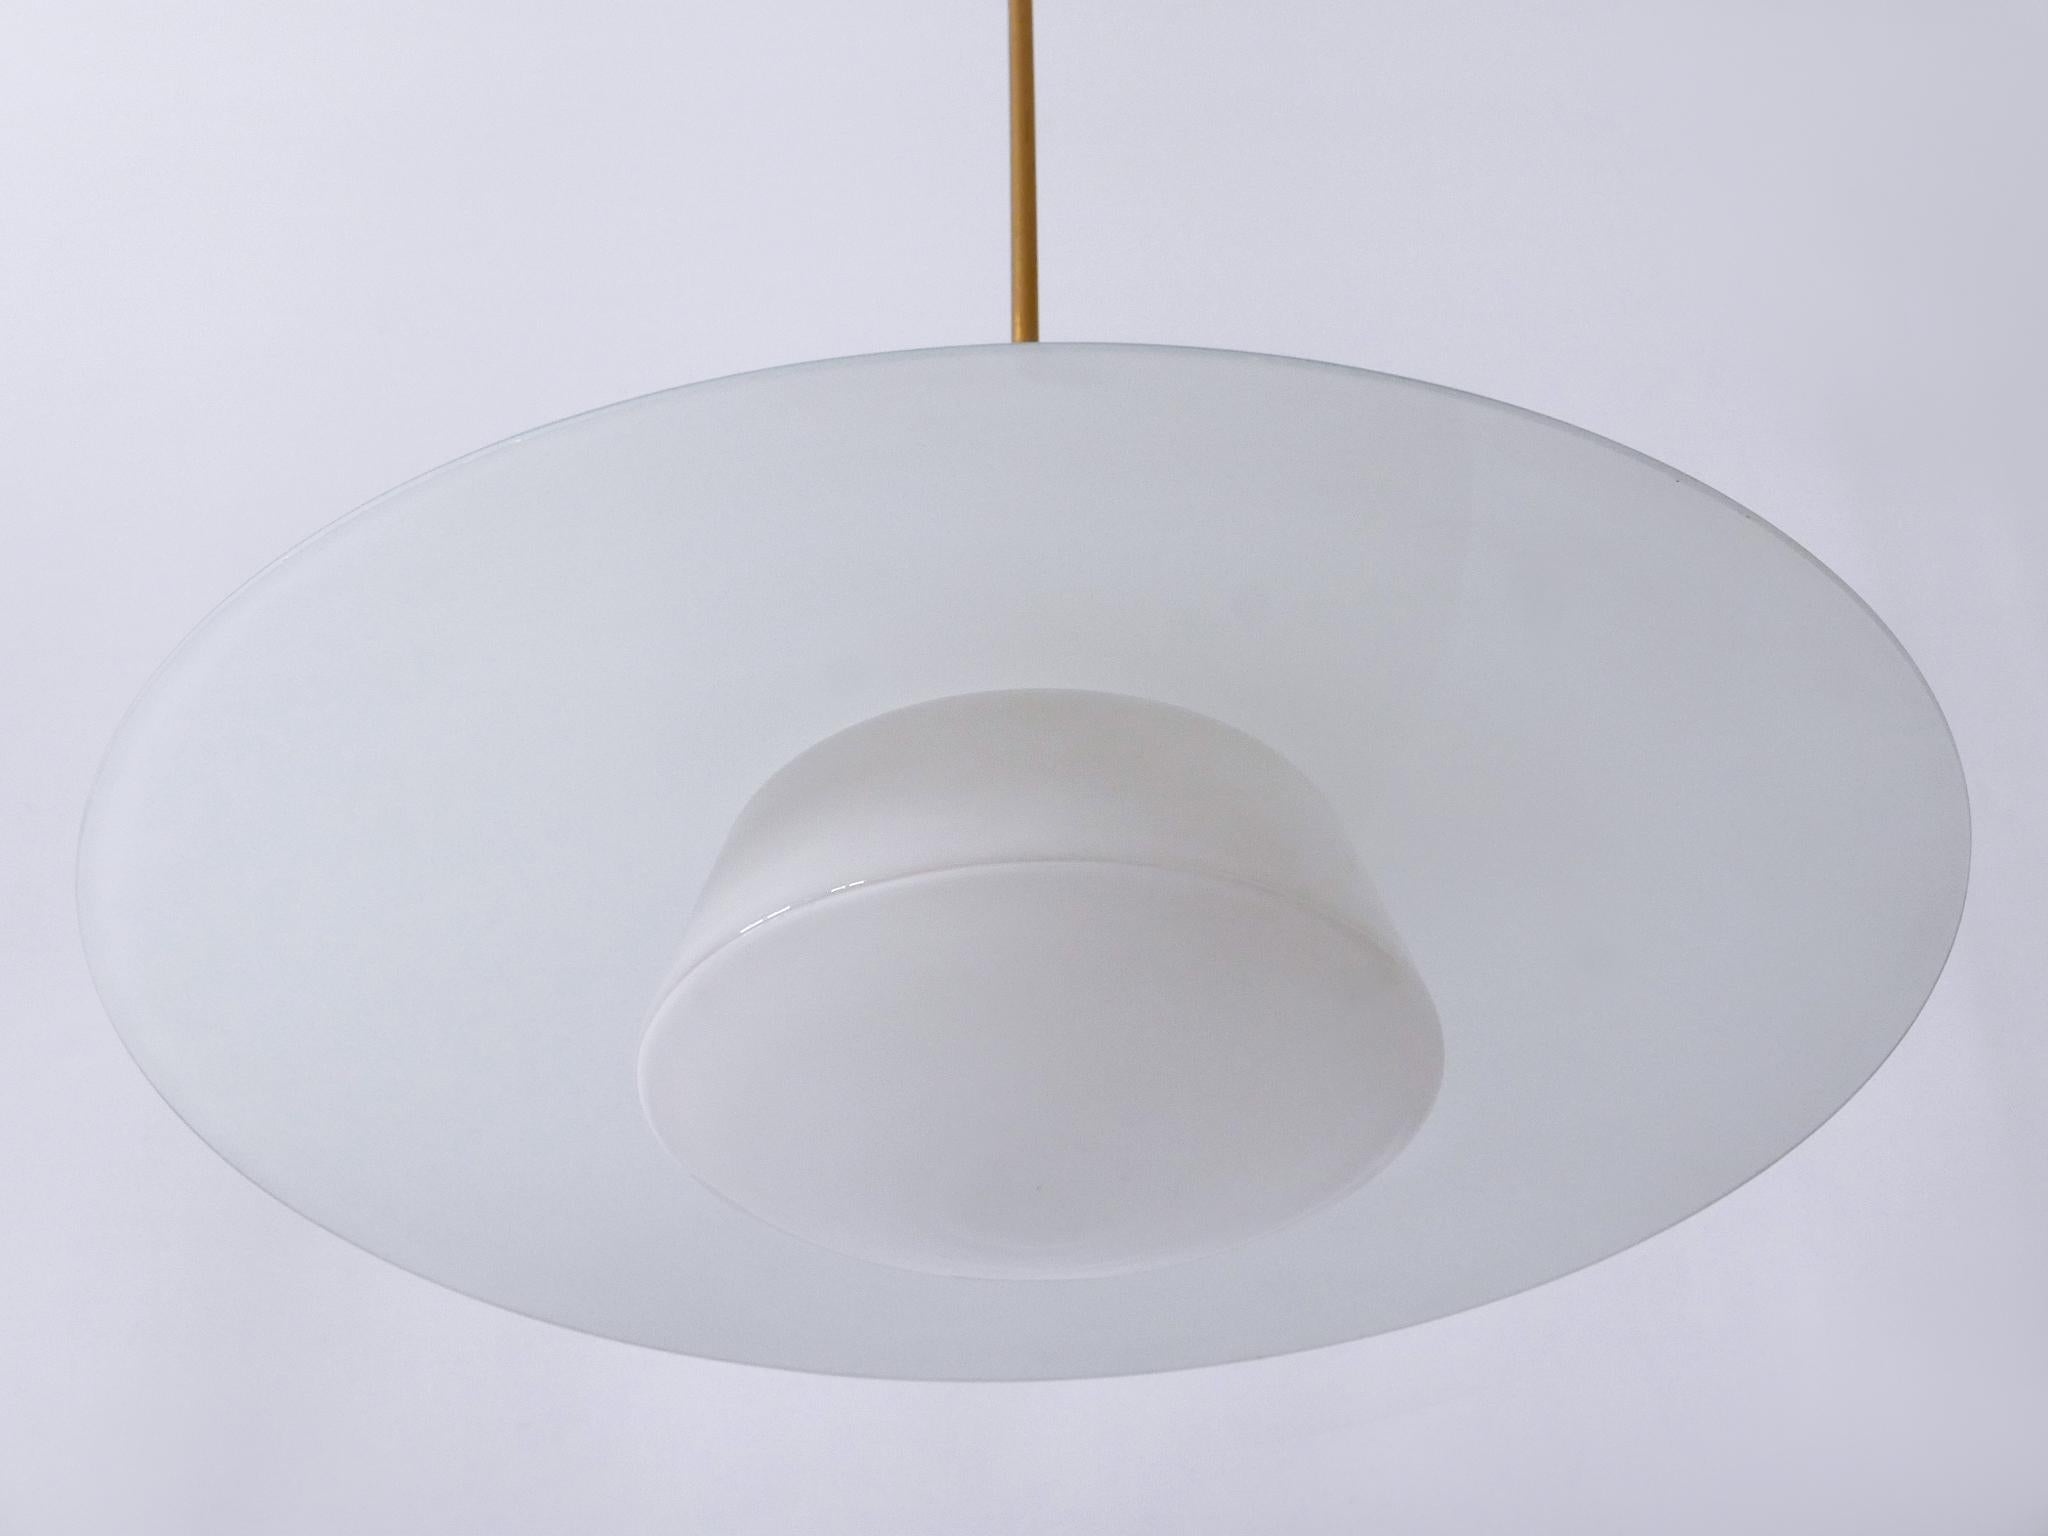 Rare Mid-Century Modern Pendant Lamp by Wolfgang Tümpel for Doria Germany 1950s For Sale 1